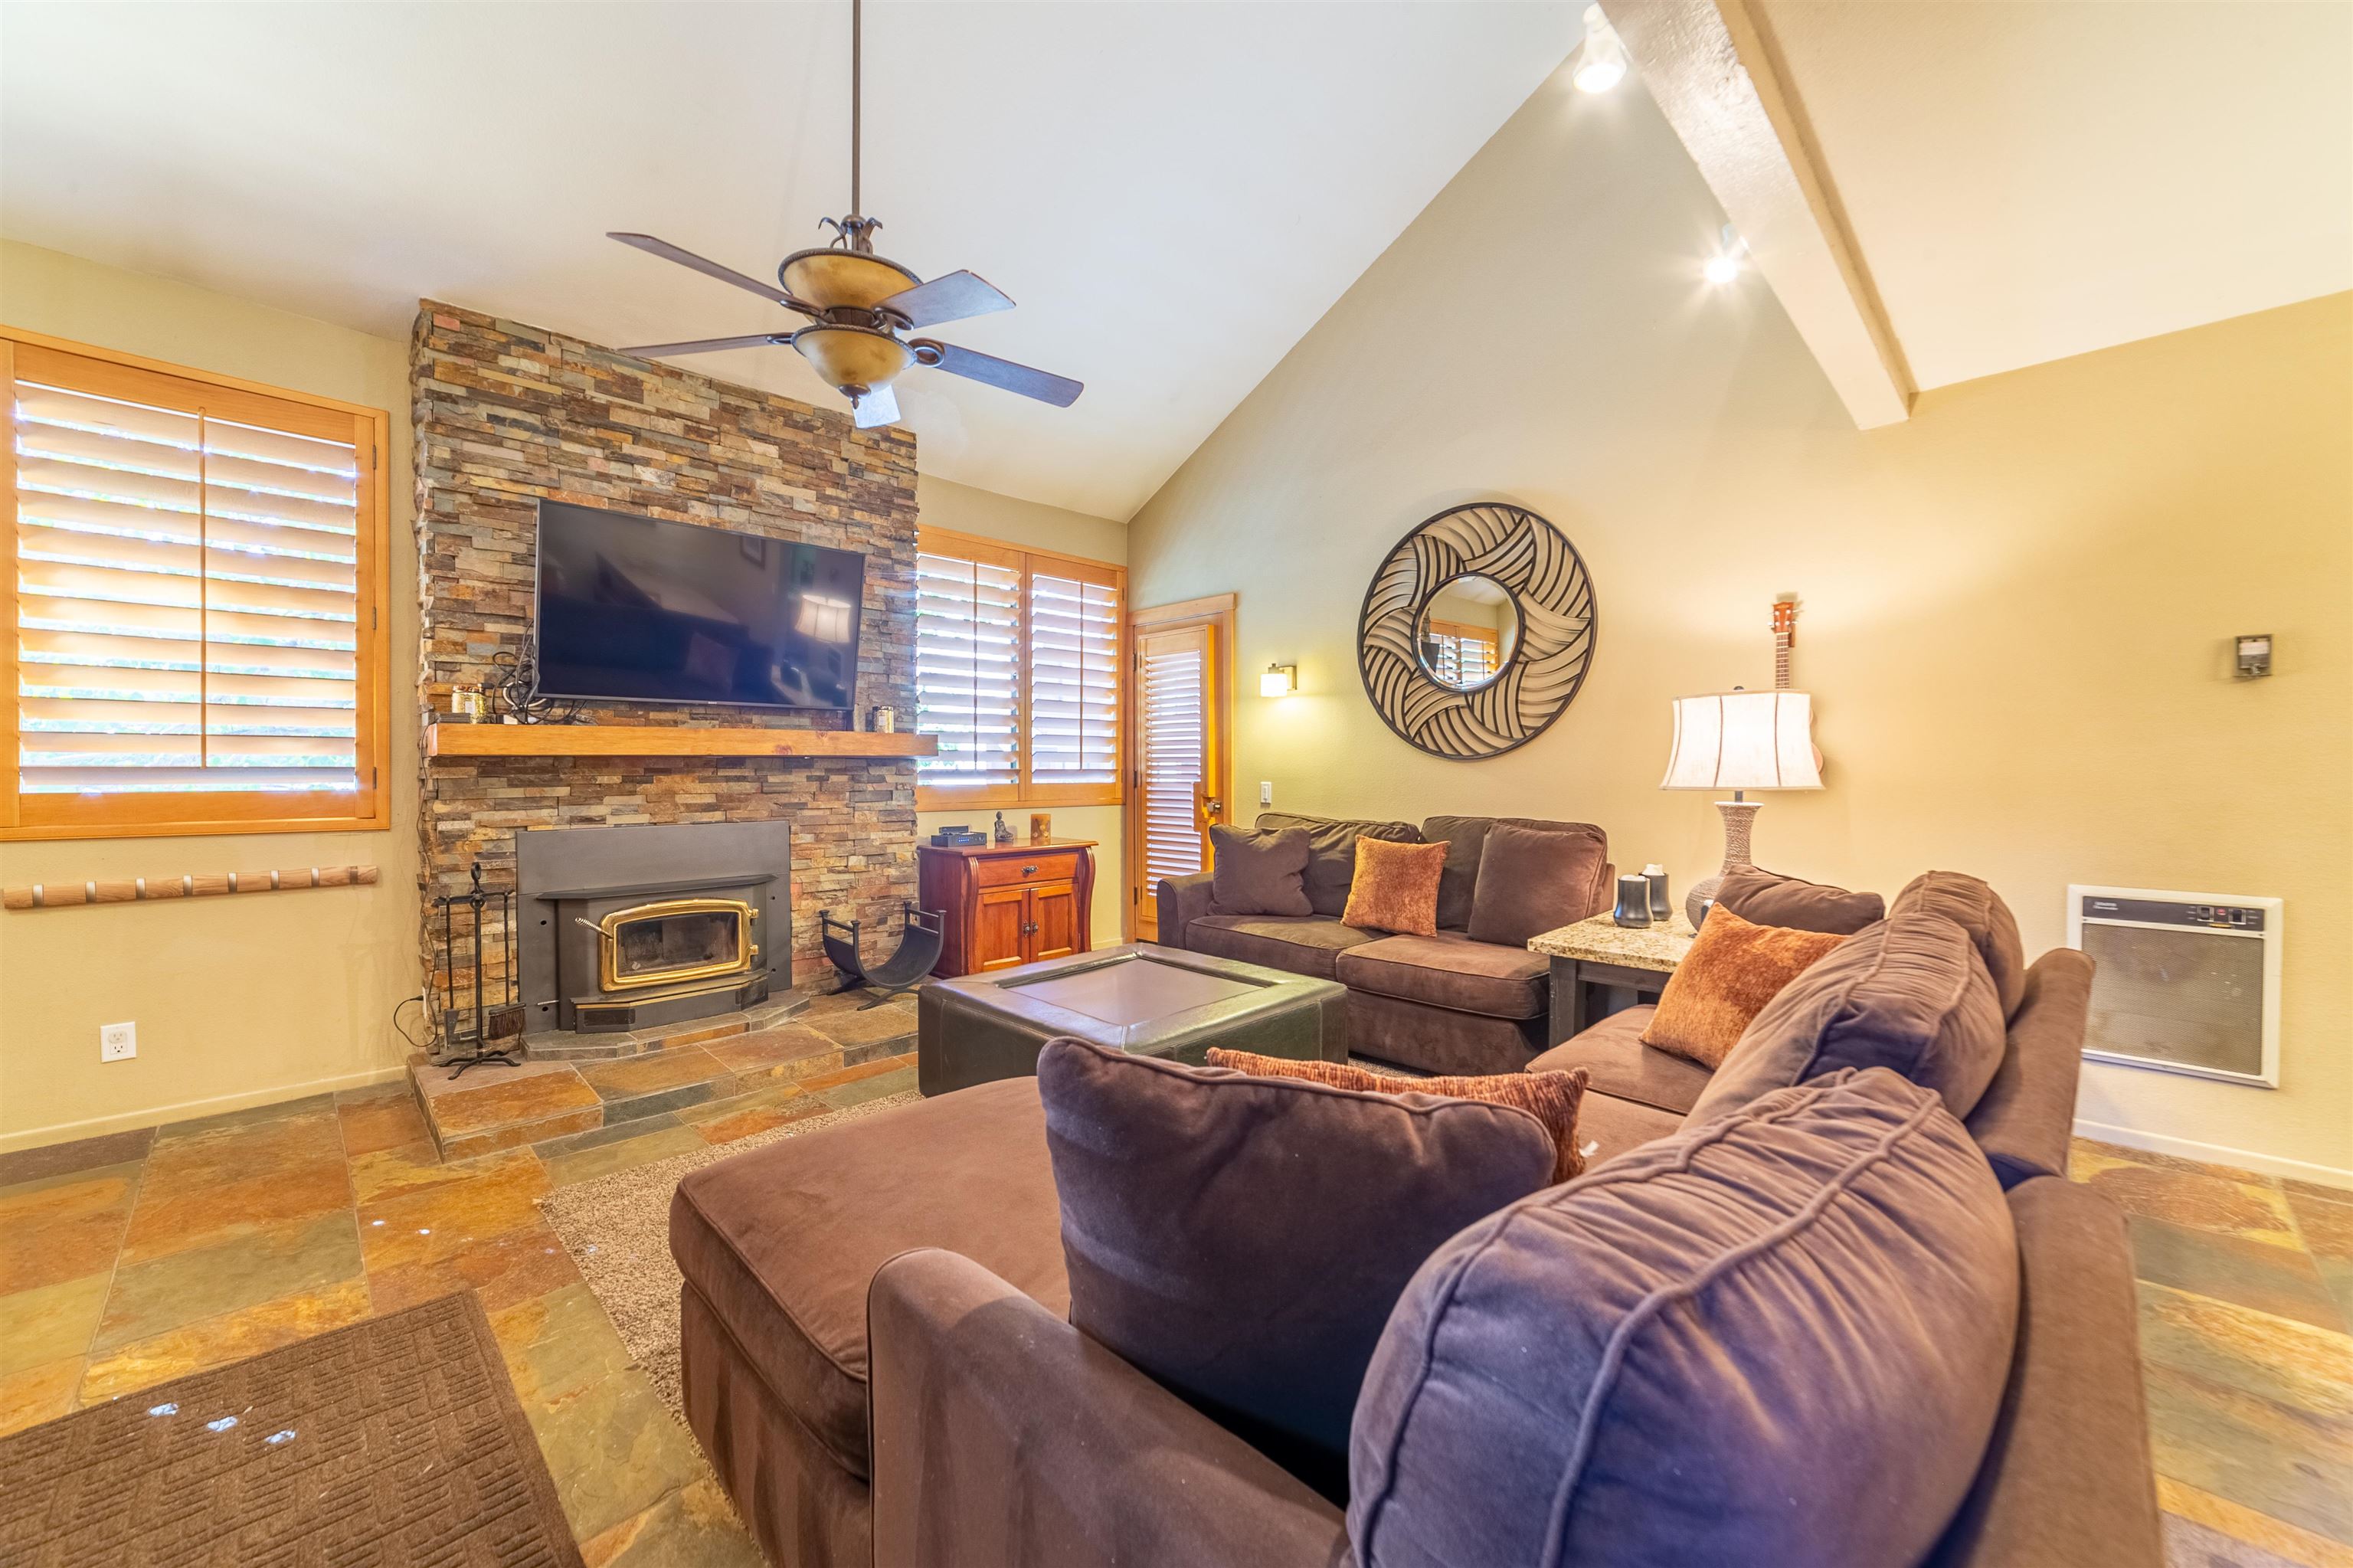 2+loft/2 bath remodeled rental condo just a short walk to the Village at Mammoth! Offering stainless appliances, wood burning fireplace, updated furnishings, modern touches throughout. 2 parking spaces included with condo.